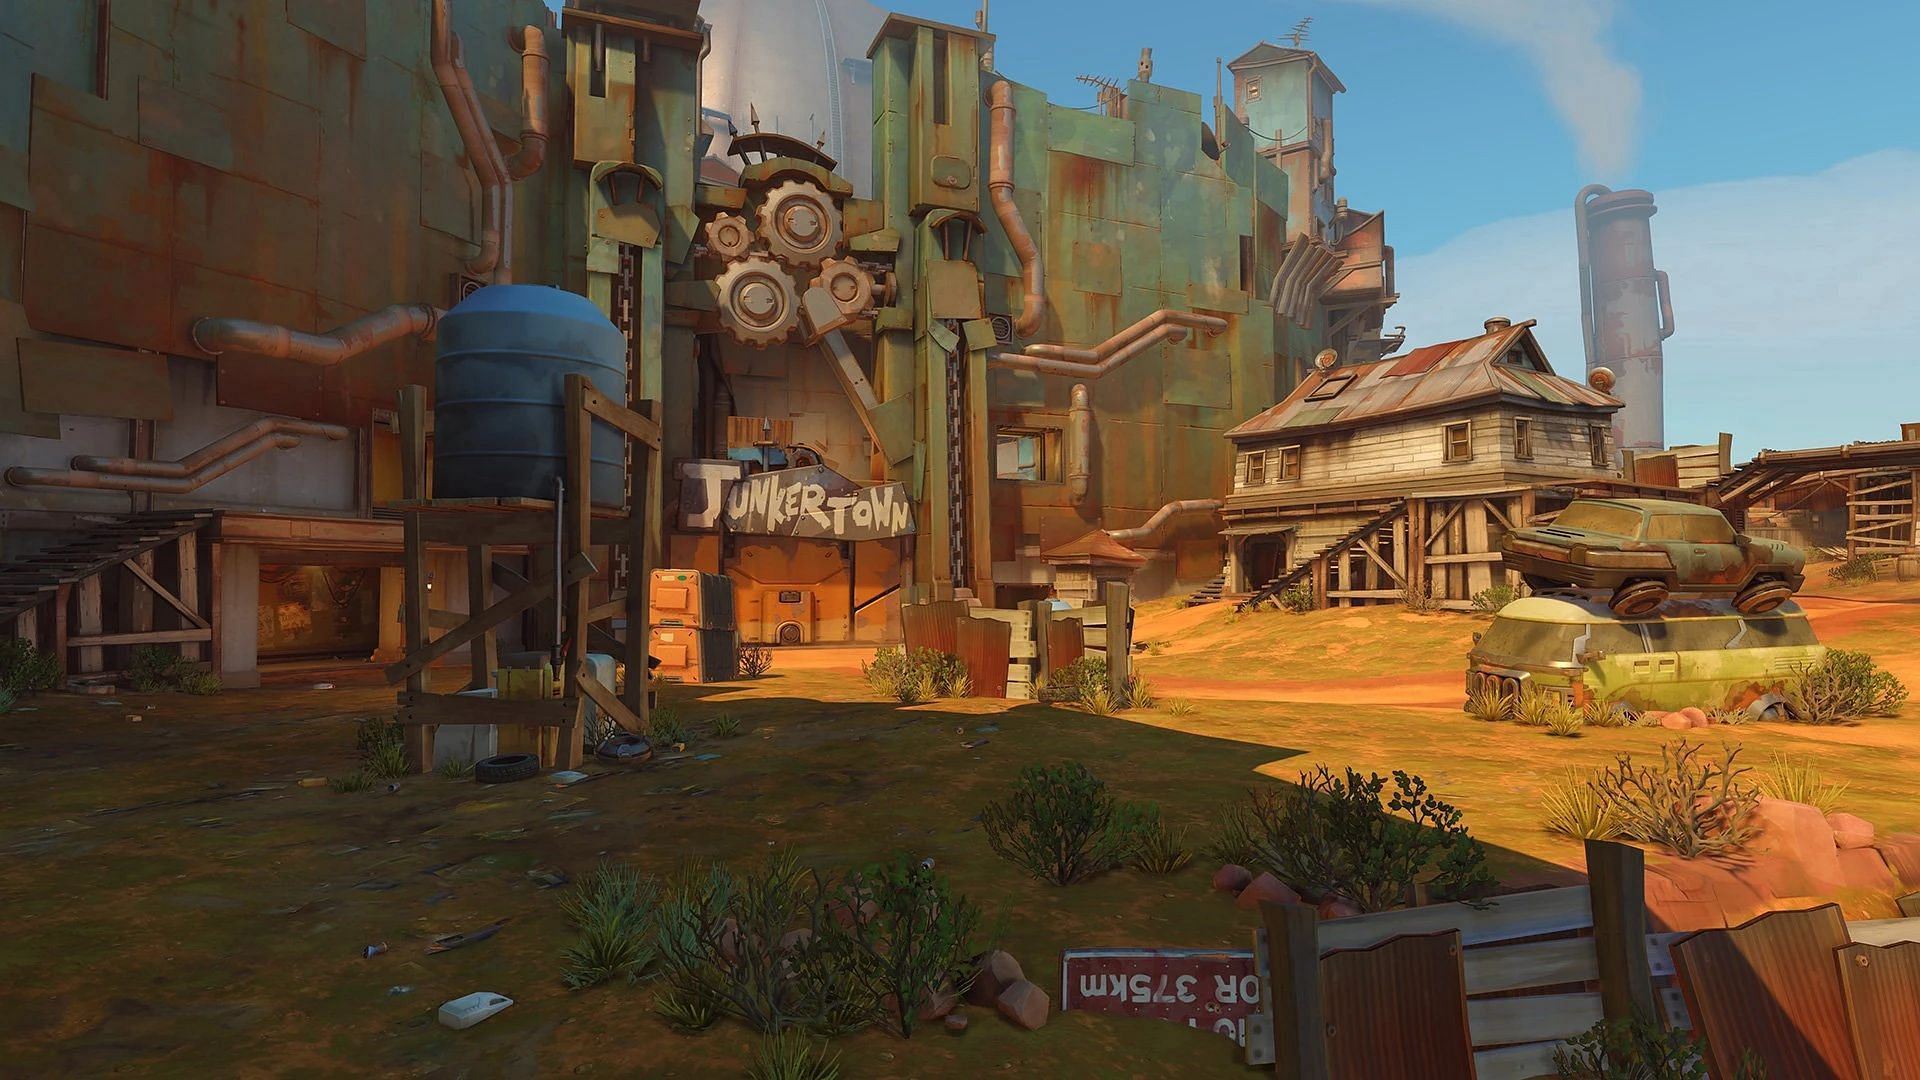 Junkertown Overwatch 2 patch notes (Image via Overwatch wiki)